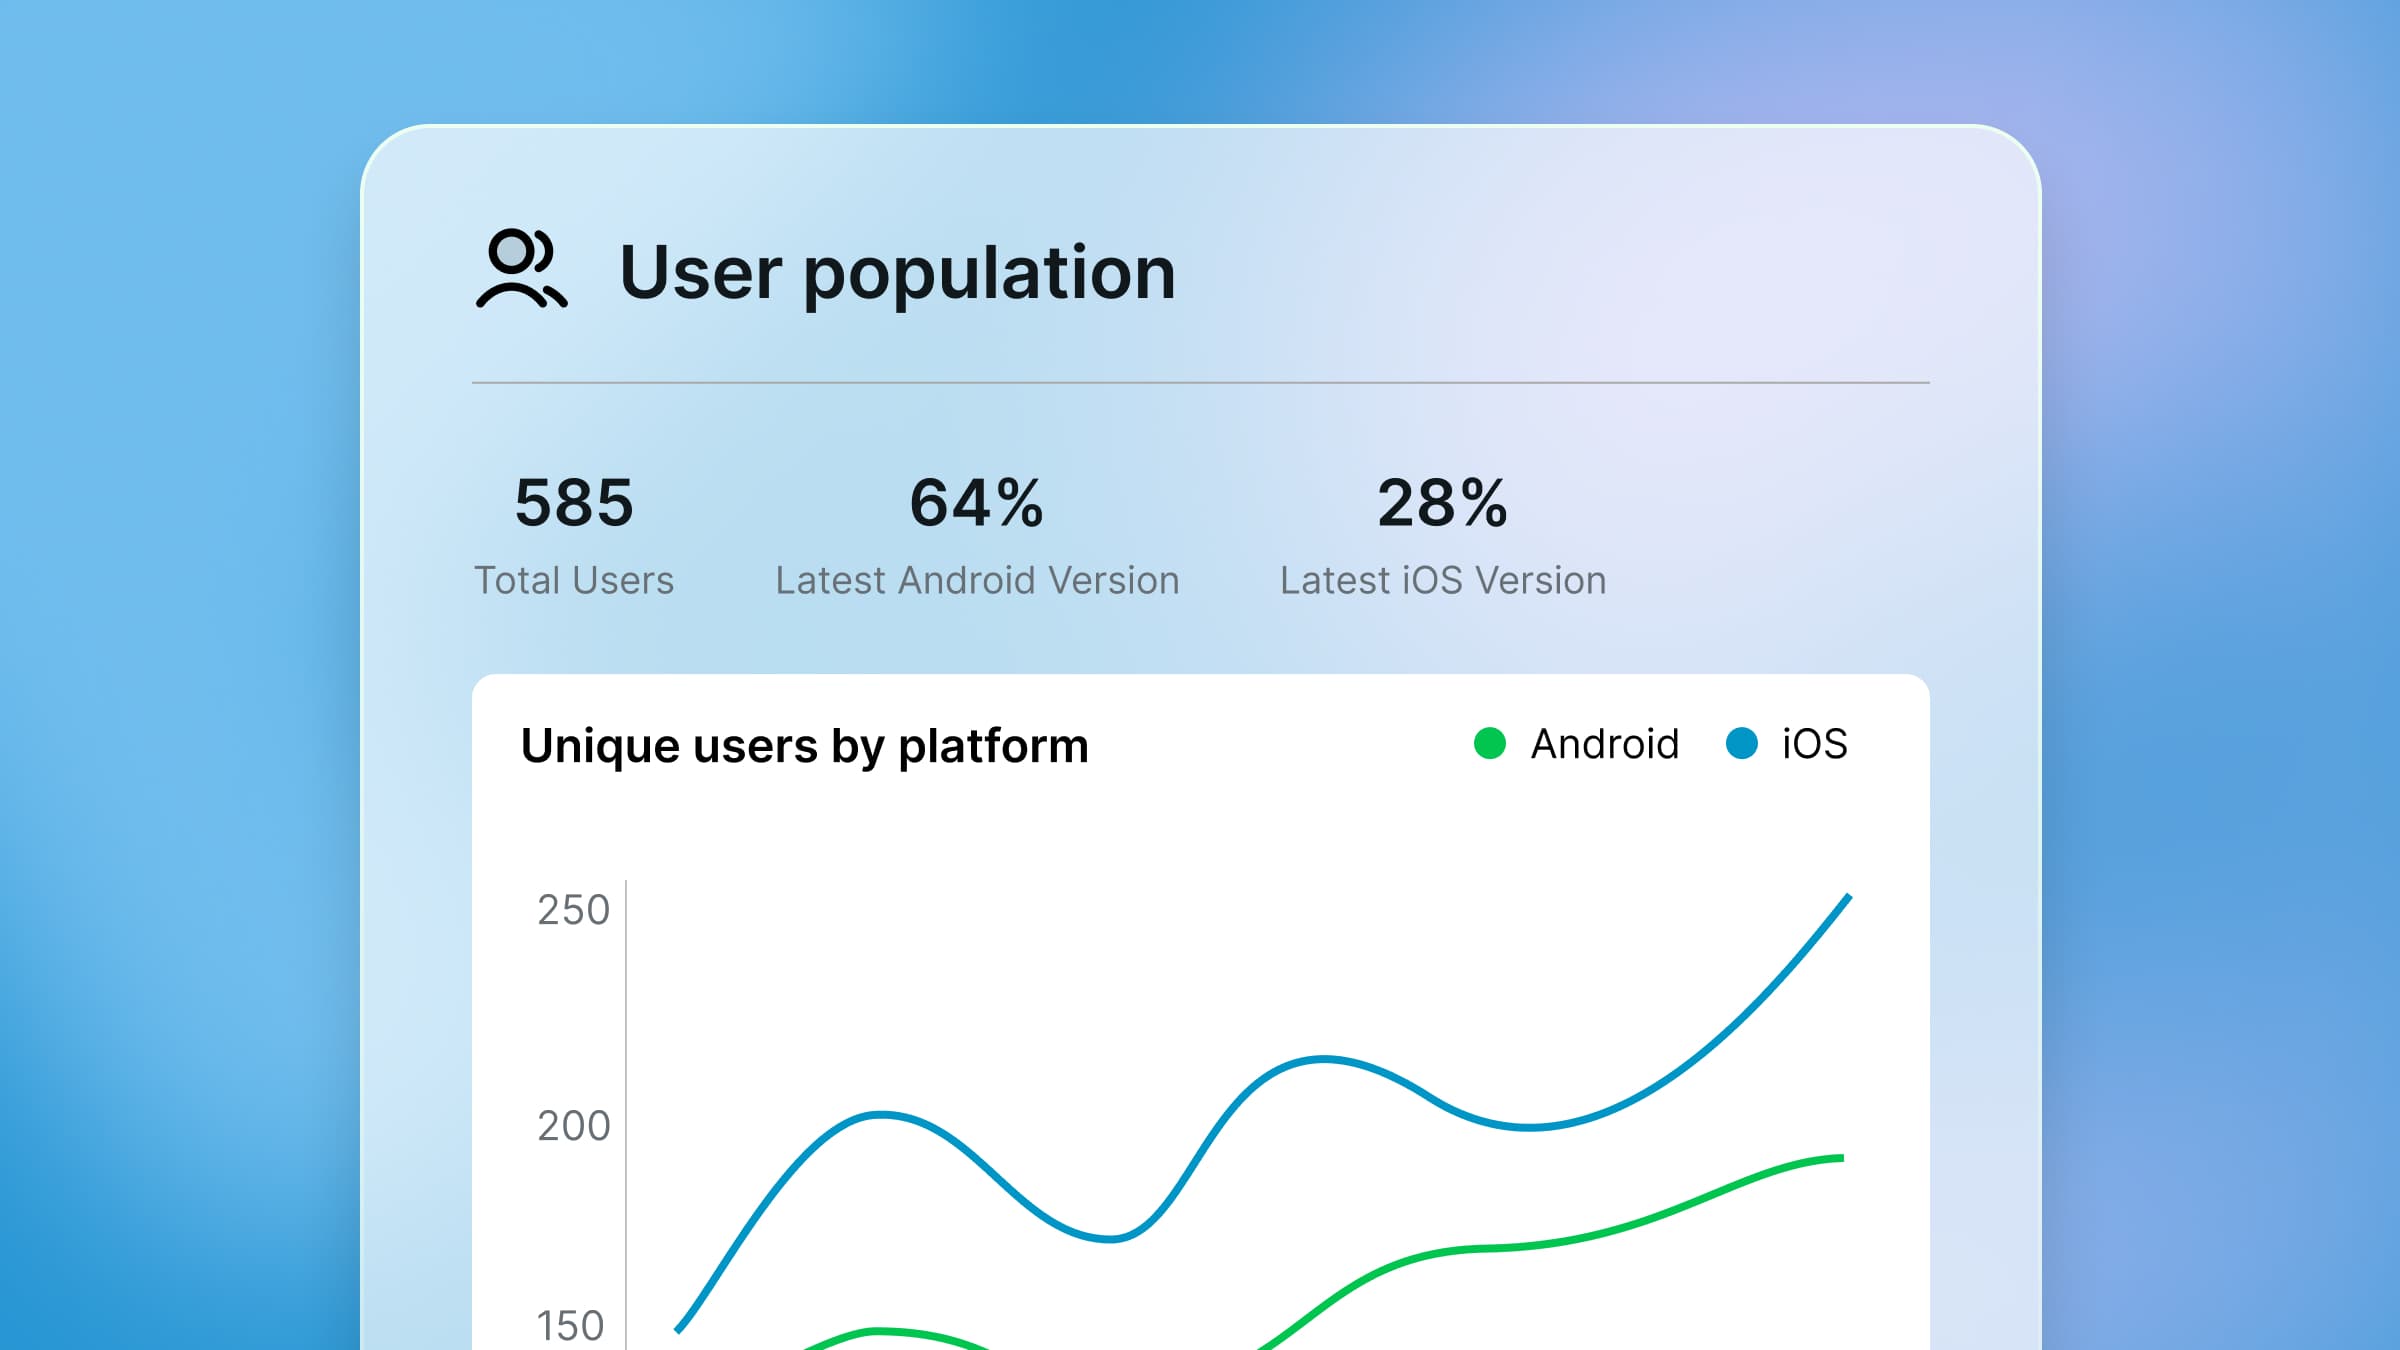 Statistics and graphs showing how users by platform for an example app